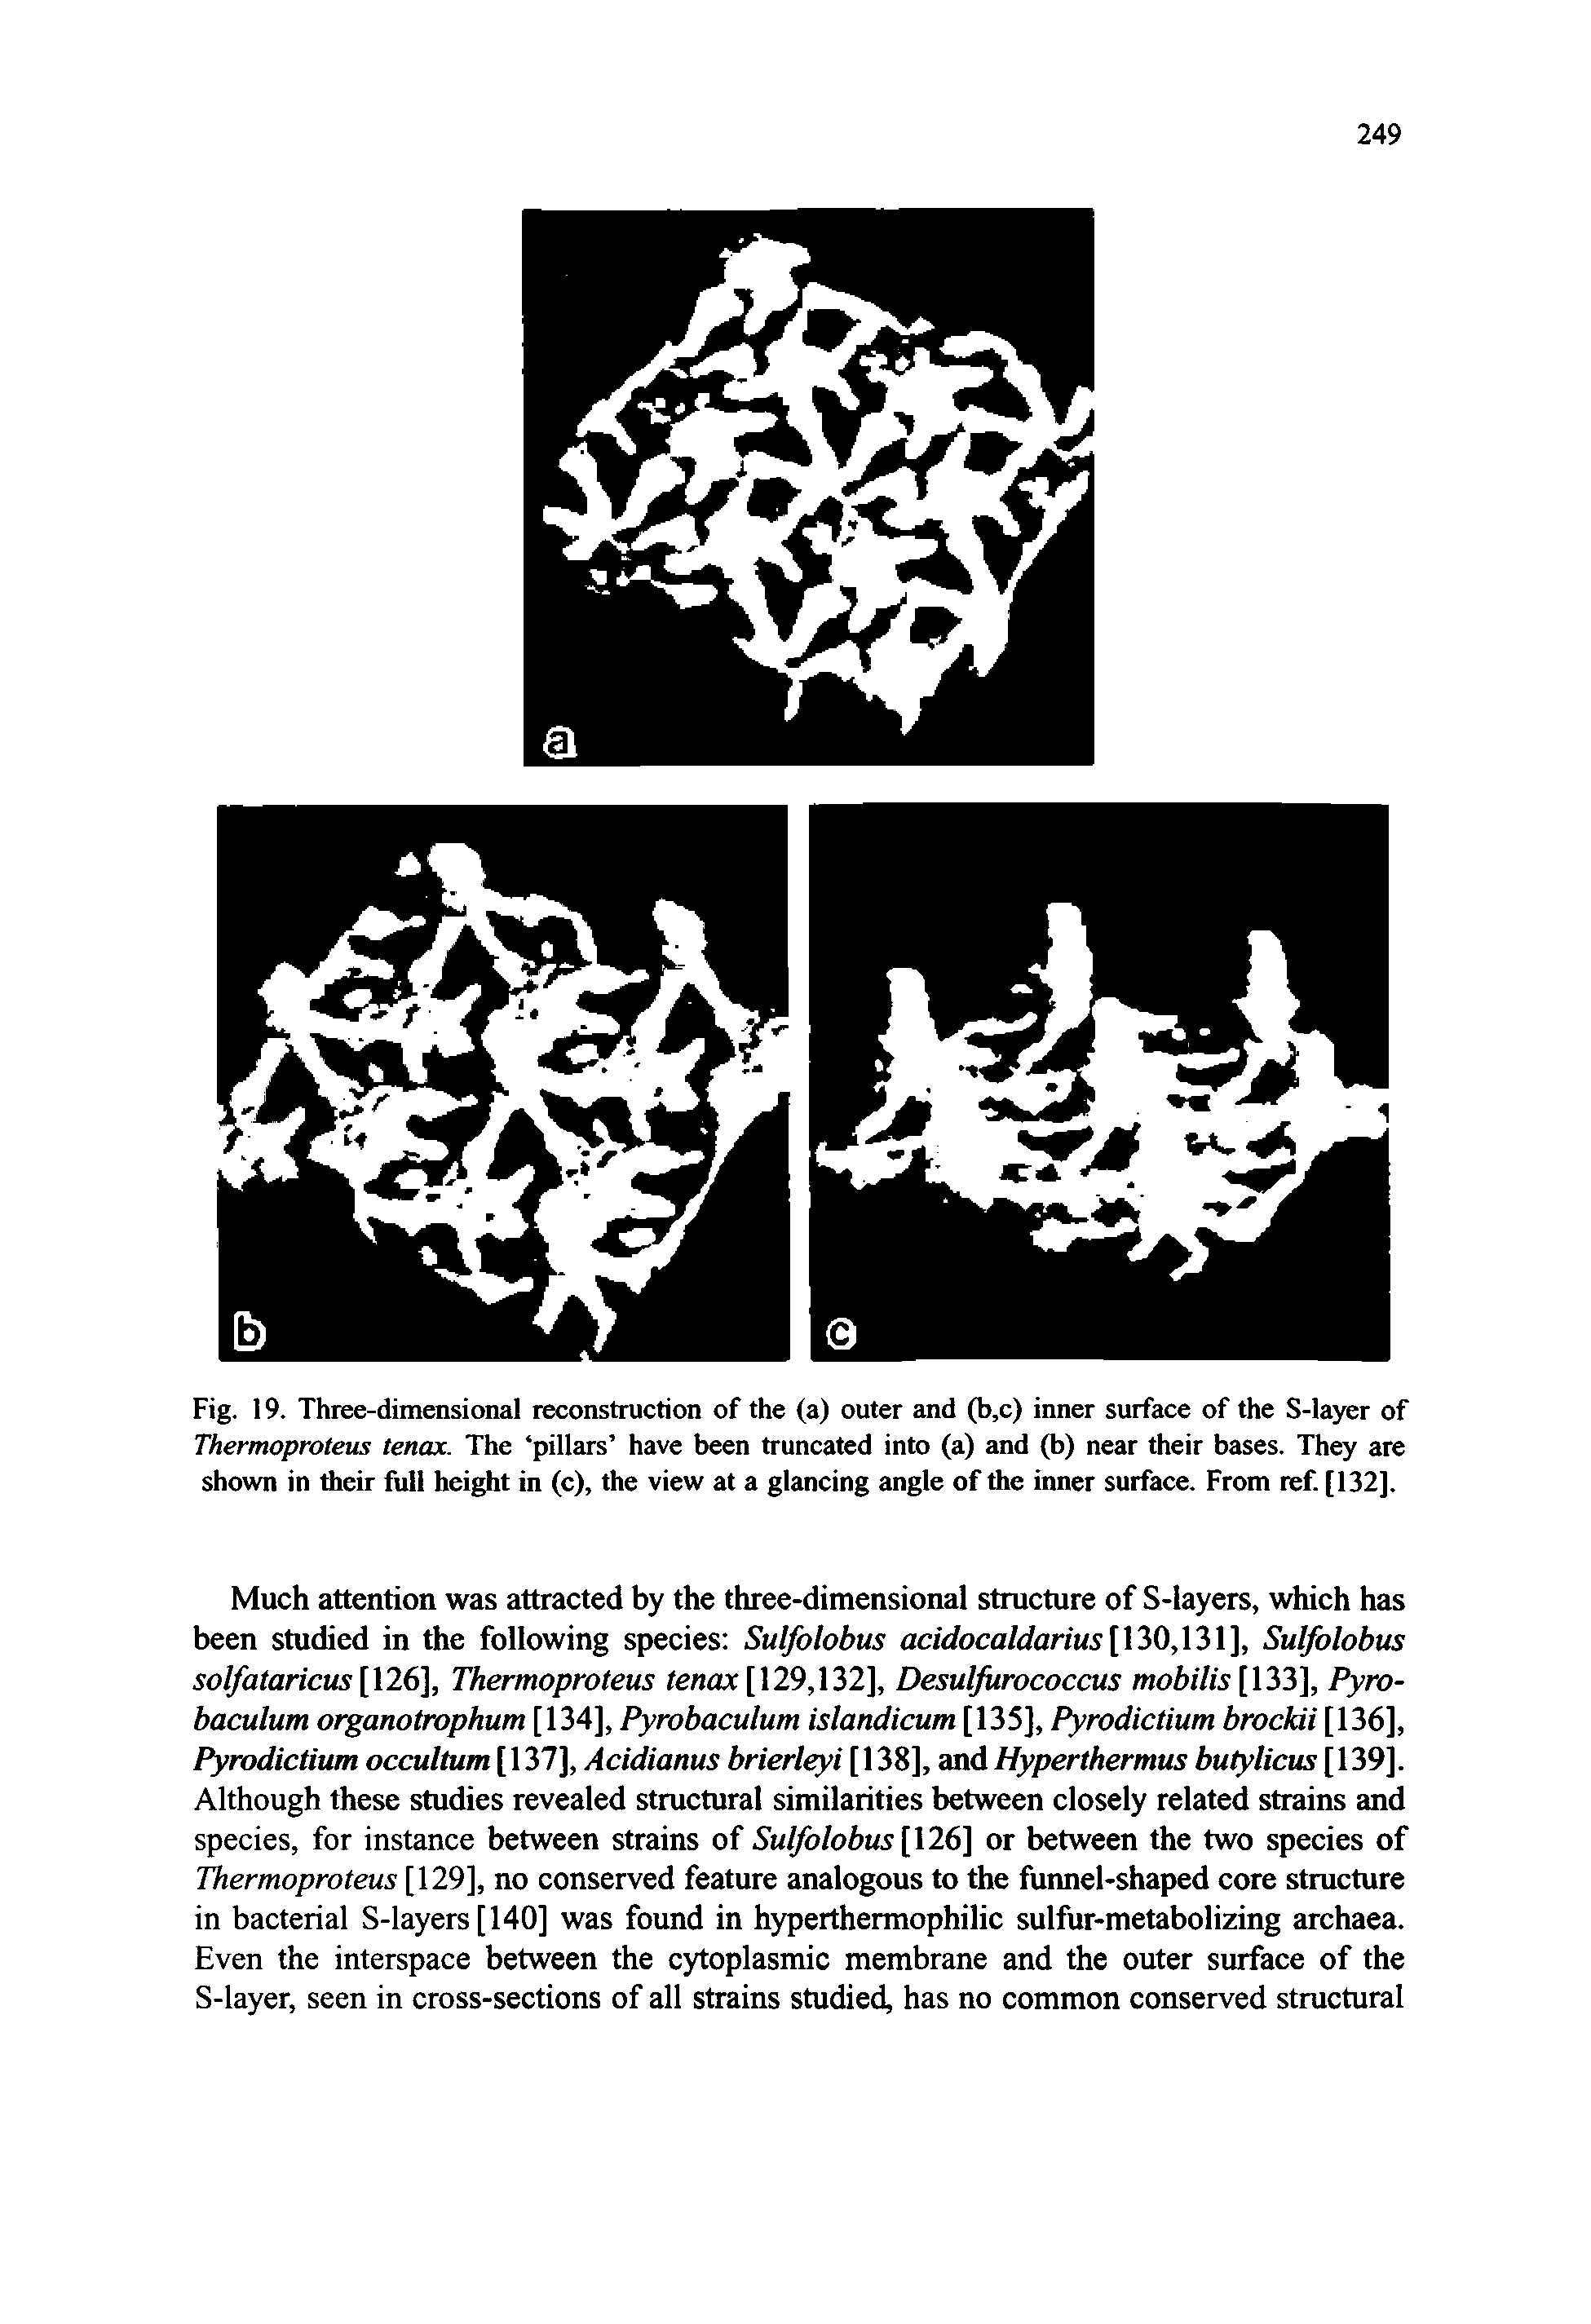 Fig. 19. Three-dimensional reconstruction of the (a) outer and (b,c) inner surface of the S-layer of Thermoproteus tenax. The pillars have been truncated into (a) and (b) near their bases. They are shown in their full height in (c), the view at a glancing angle of the inner surface. From ref. [132].